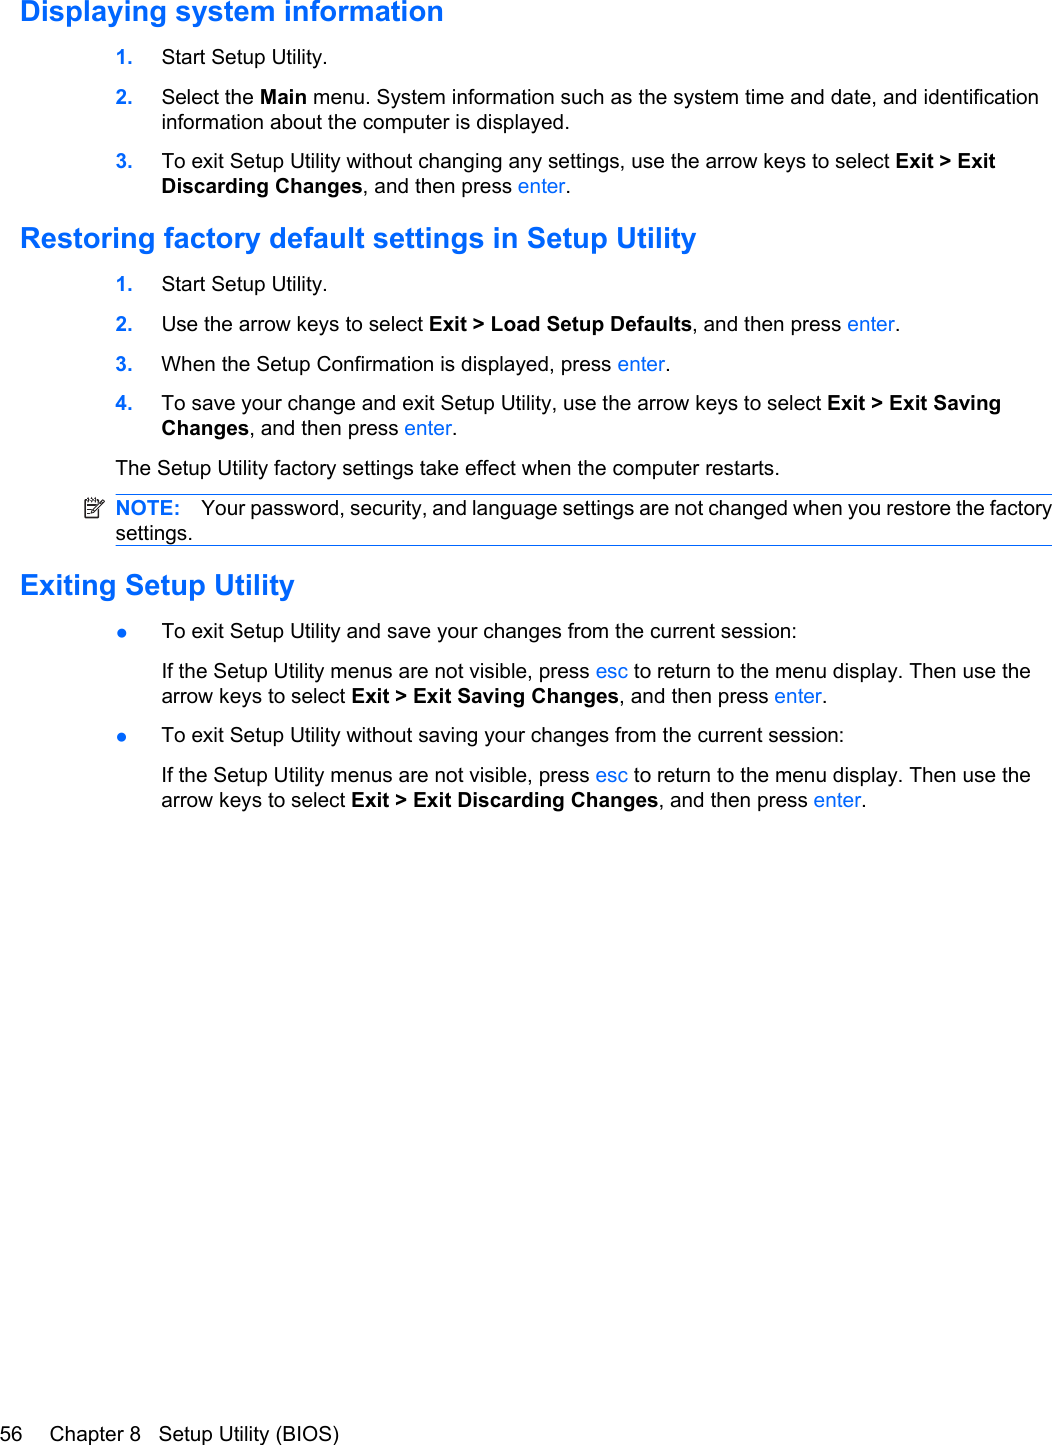 Displaying system information1. Start Setup Utility.2. Select the Main menu. System information such as the system time and date, and identificationinformation about the computer is displayed.3. To exit Setup Utility without changing any settings, use the arrow keys to select Exit &gt; ExitDiscarding Changes, and then press enter.Restoring factory default settings in Setup Utility1. Start Setup Utility.2. Use the arrow keys to select Exit &gt; Load Setup Defaults, and then press enter.3. When the Setup Confirmation is displayed, press enter.4. To save your change and exit Setup Utility, use the arrow keys to select Exit &gt; Exit SavingChanges, and then press enter.The Setup Utility factory settings take effect when the computer restarts.NOTE: Your password, security, and language settings are not changed when you restore the factorysettings.Exiting Setup Utility●To exit Setup Utility and save your changes from the current session:If the Setup Utility menus are not visible, press esc to return to the menu display. Then use thearrow keys to select Exit &gt; Exit Saving Changes, and then press enter.●To exit Setup Utility without saving your changes from the current session:If the Setup Utility menus are not visible, press esc to return to the menu display. Then use thearrow keys to select Exit &gt; Exit Discarding Changes, and then press enter.56 Chapter 8   Setup Utility (BIOS)